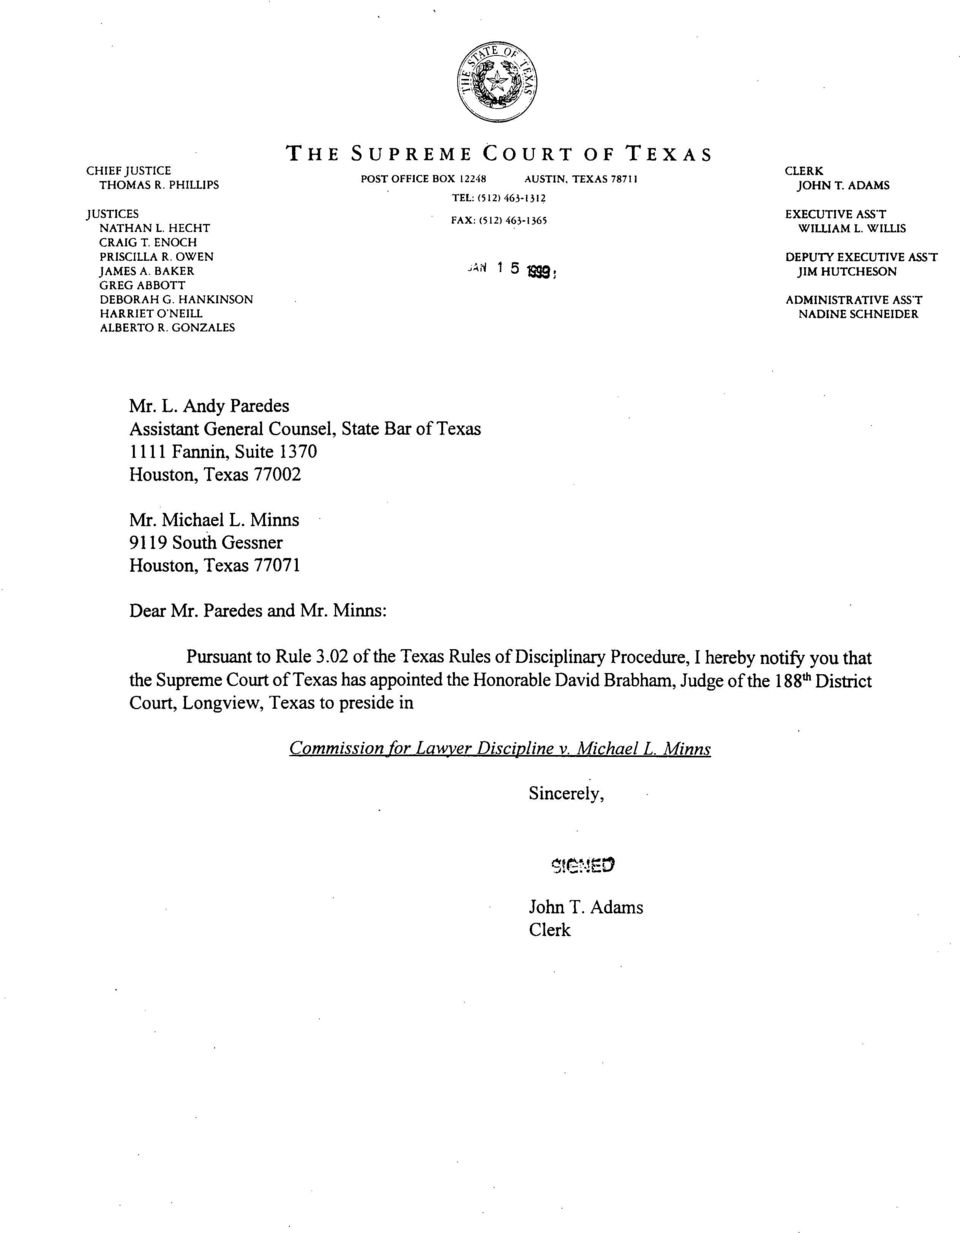 WILLIS DEPUTY EXECUTIVE ASS'T JIM HUTCHESON ADMINISTRATIVE ASS'T NADINE SCHNEIDER Mr. L. Andy Paredes Assistant General Counsel, State Bar of Texas 1111 Fannin, Suite 1370 Houston, Texas 77002 Mr.